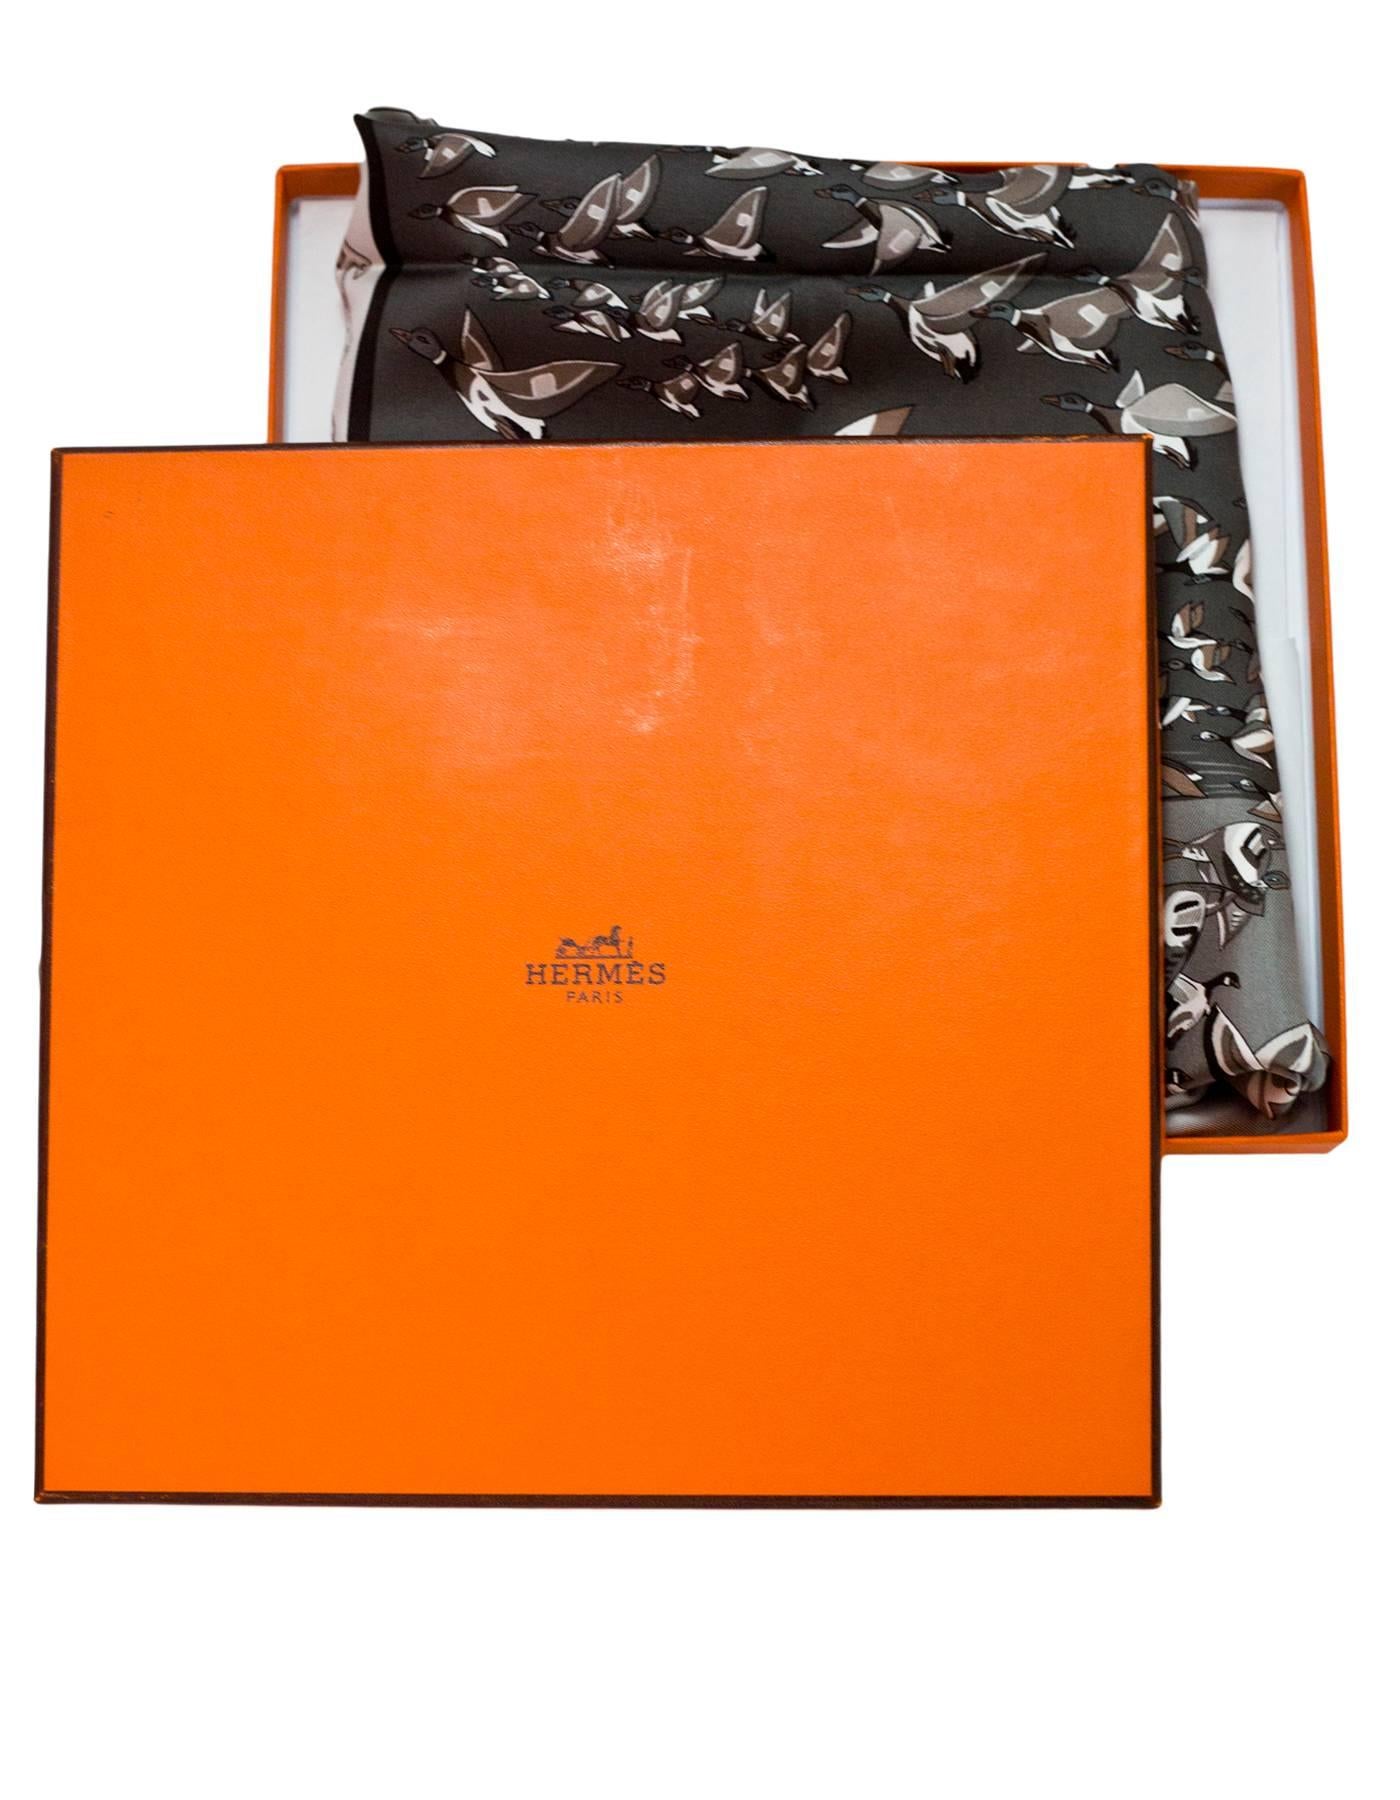 Hermes Grey Libres Comme L'Air Geese Silk 90cm Scarf with Box 2